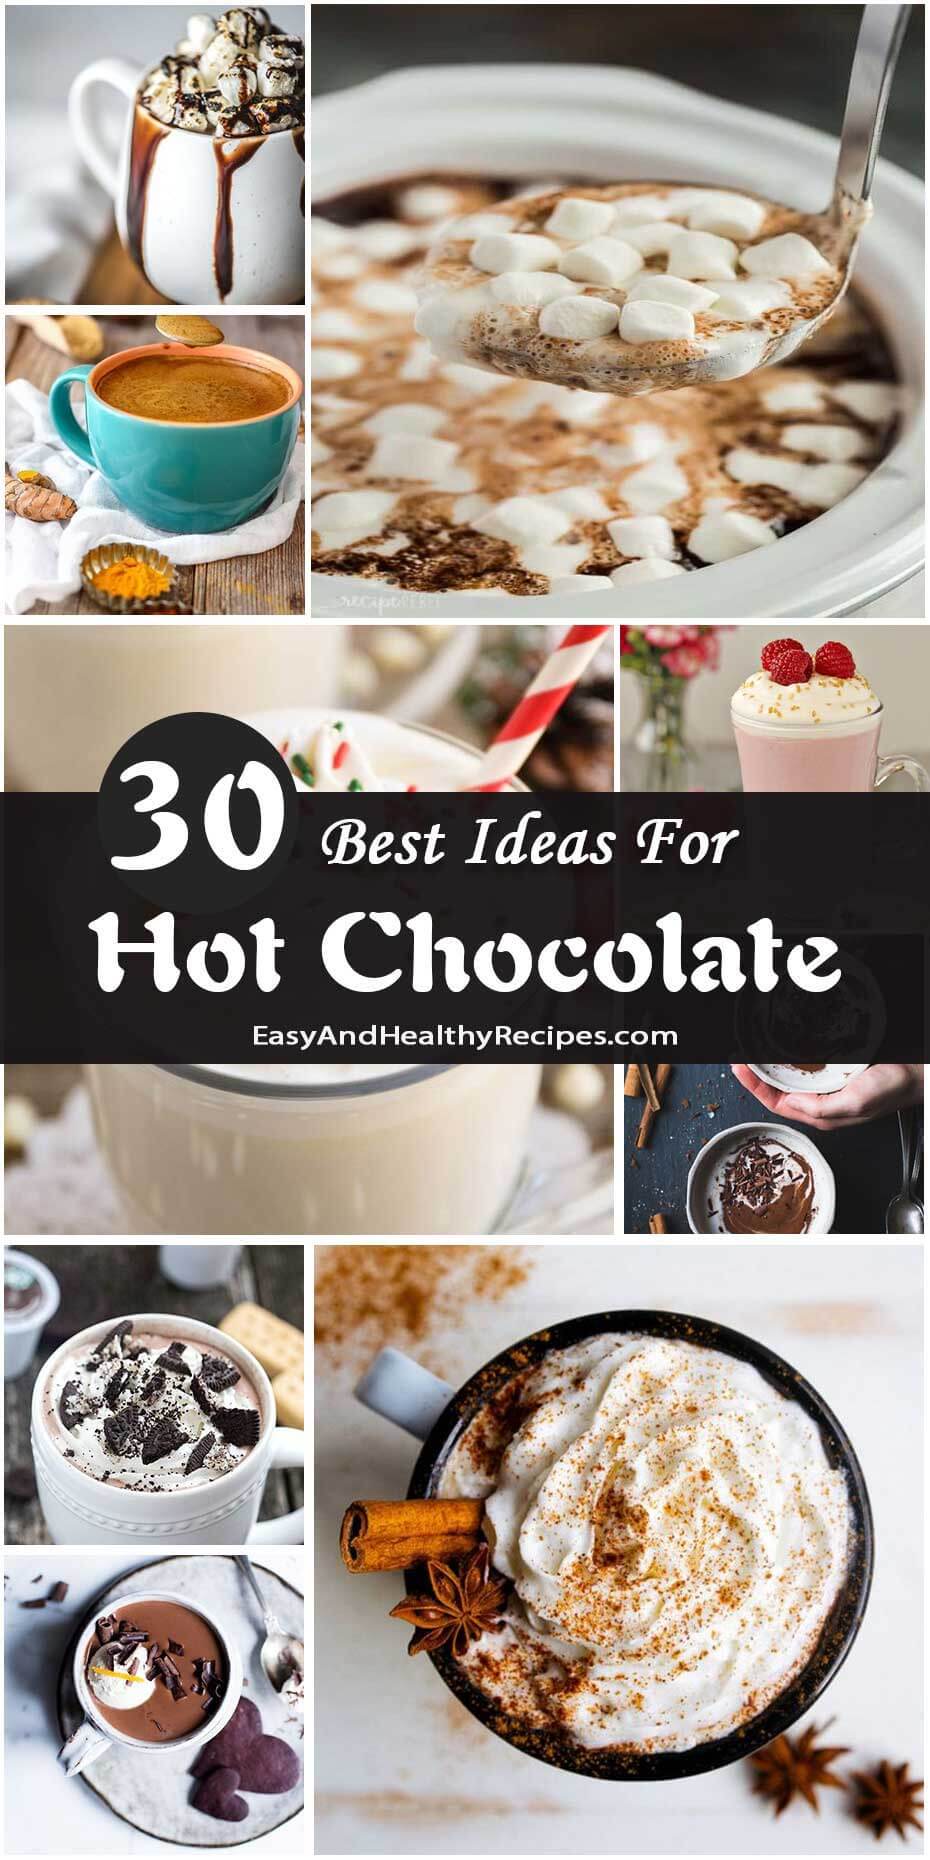 30 “Heart-Warming” Hot Chocolate Types You Should Try